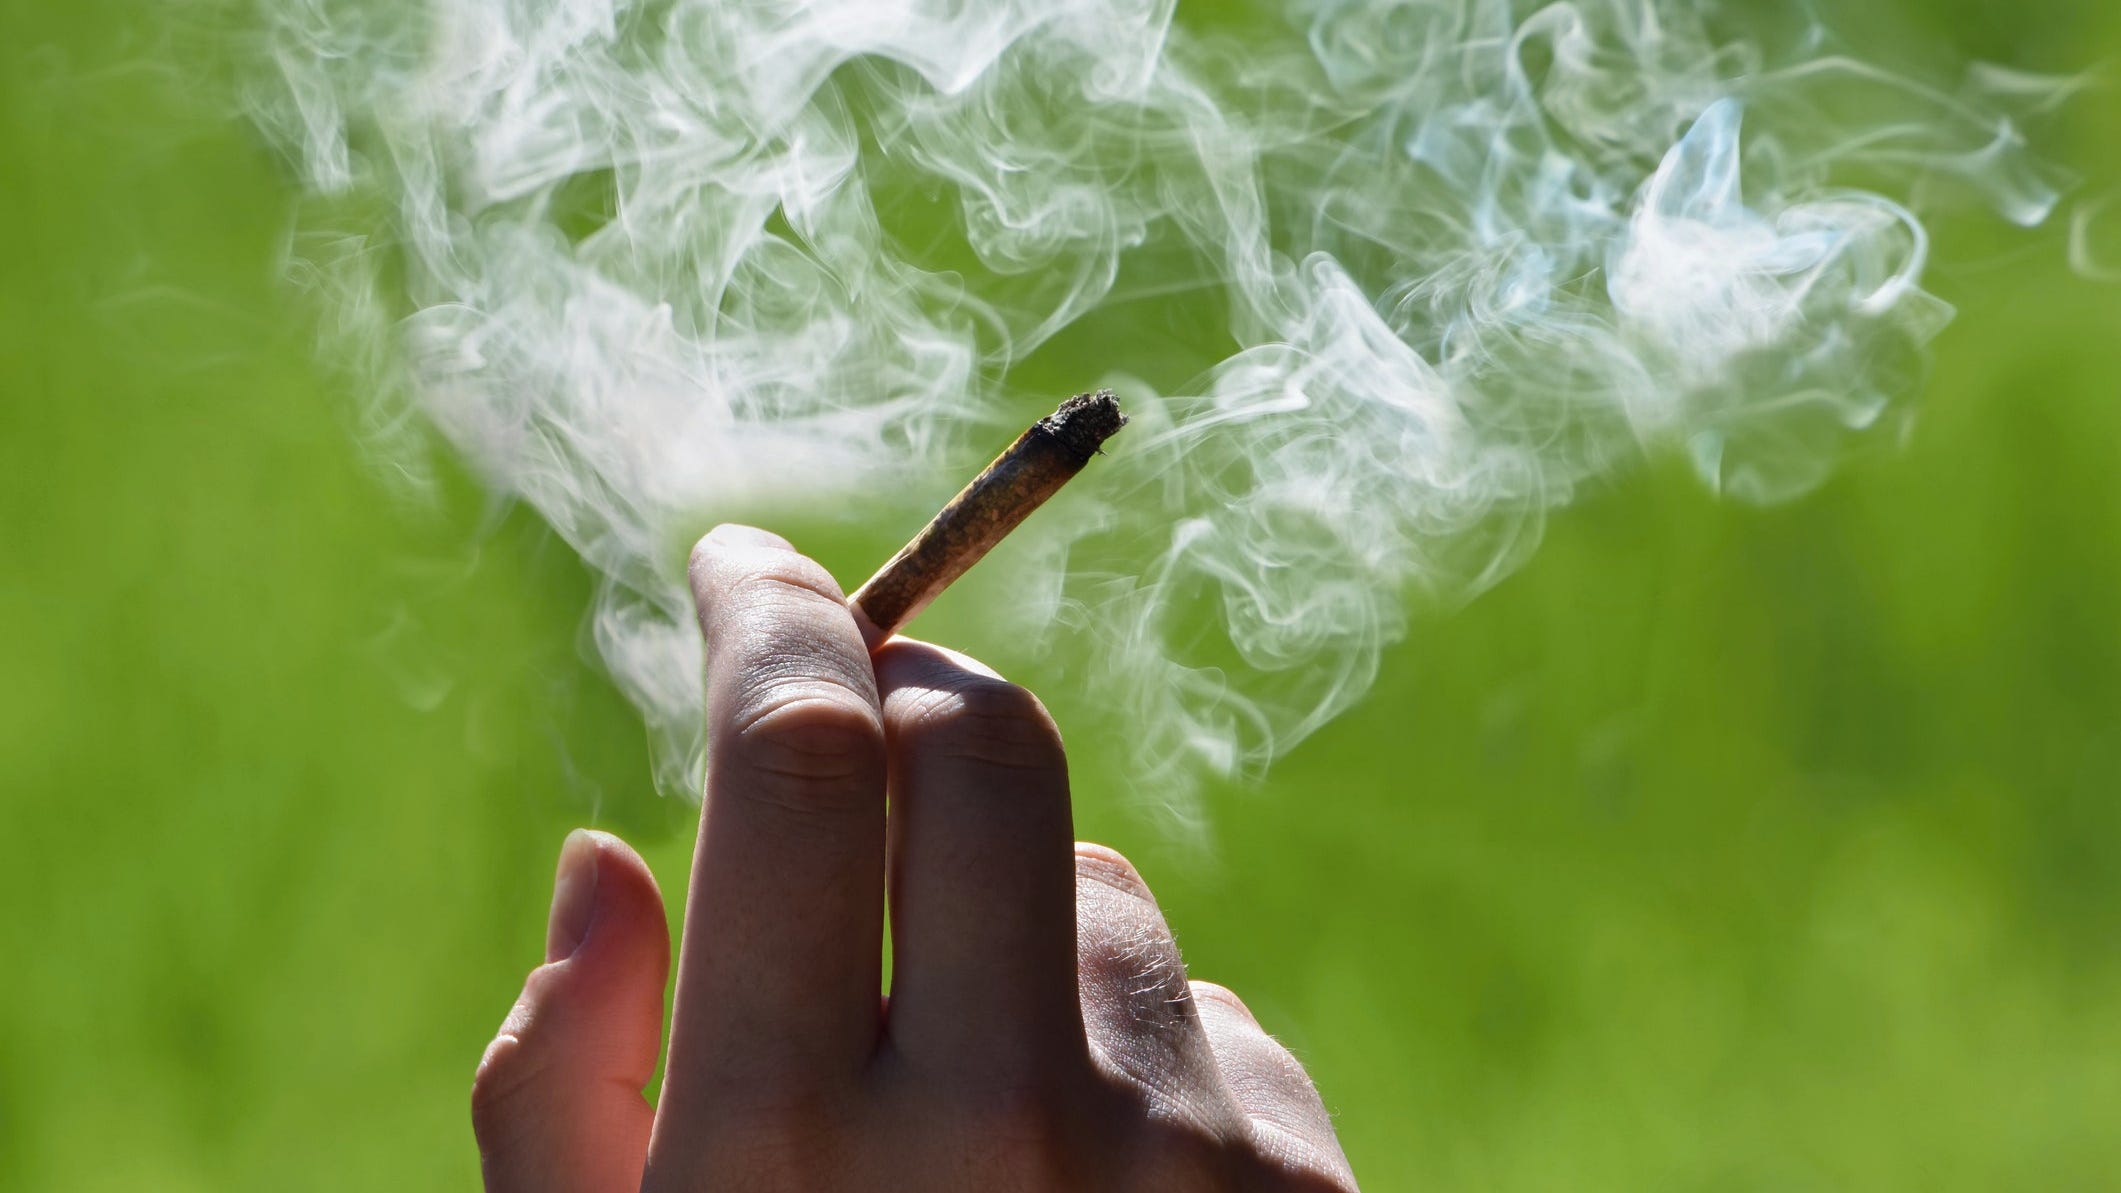 In cannabis users, fatal diseases are more prevalent than in cigarette smokers